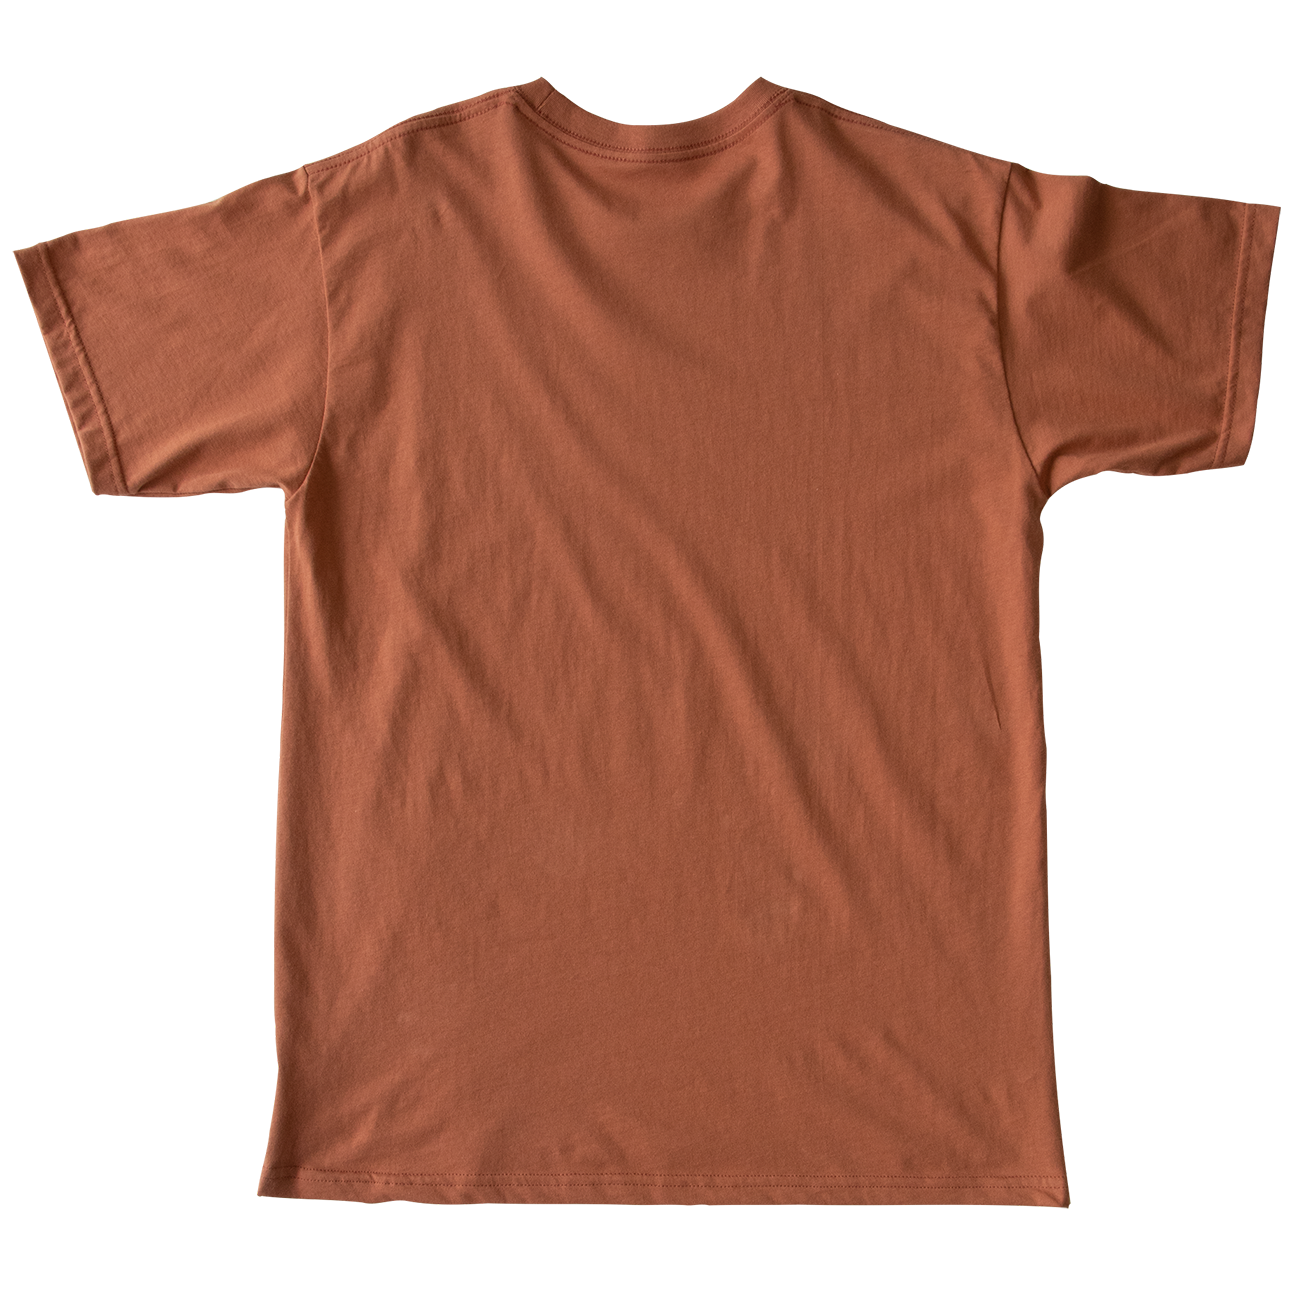 Nature Backs Short Sleeve 100% Organic Cotton T-Shirt | Minimalist Harvest Short Sleeve made with Eco-Friendly Fibers Sustainably made in the USA 